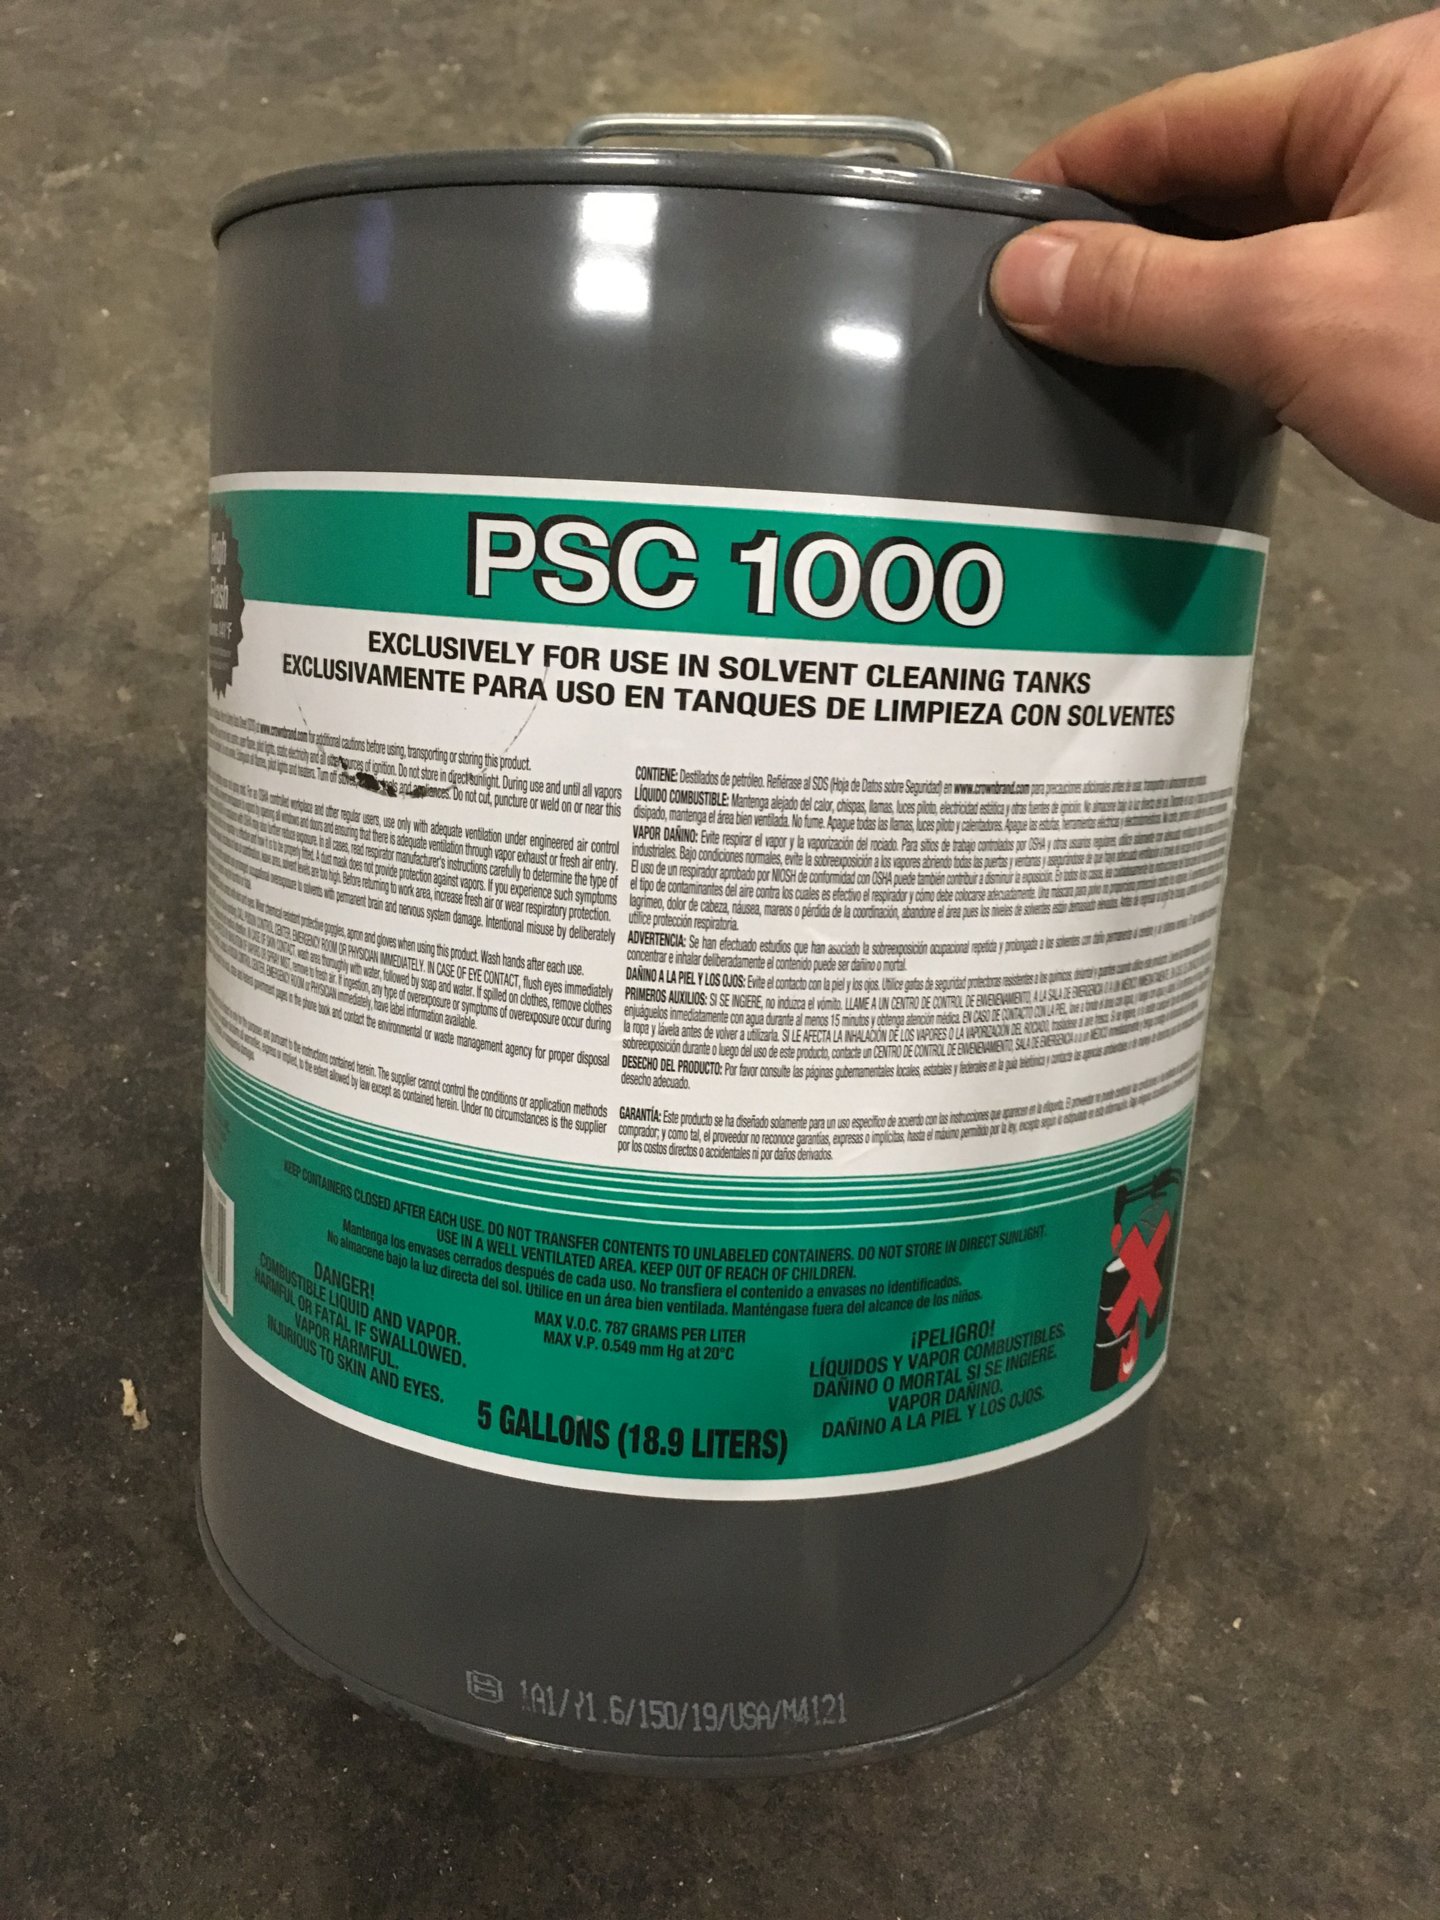 Parts cleaner solvent?